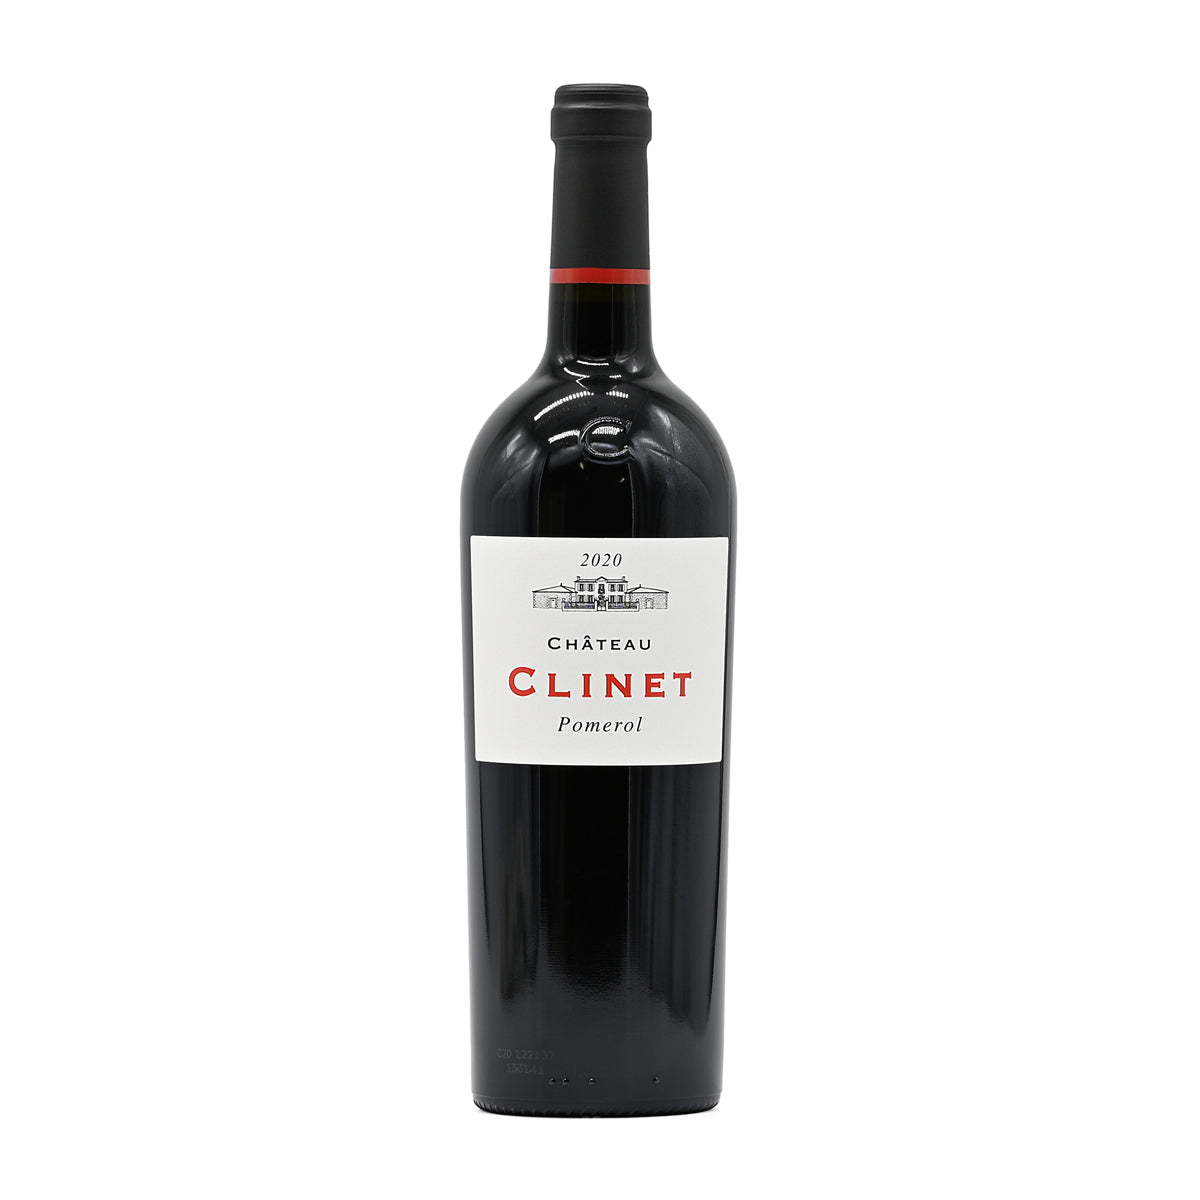 Chateau Clinet 2020, 750ml French red wine, made from a blend of Merlot and Cabernet Sauvignon; from Pomerol, Bordeaux, France – GDV Fine Wines, Hong Kong